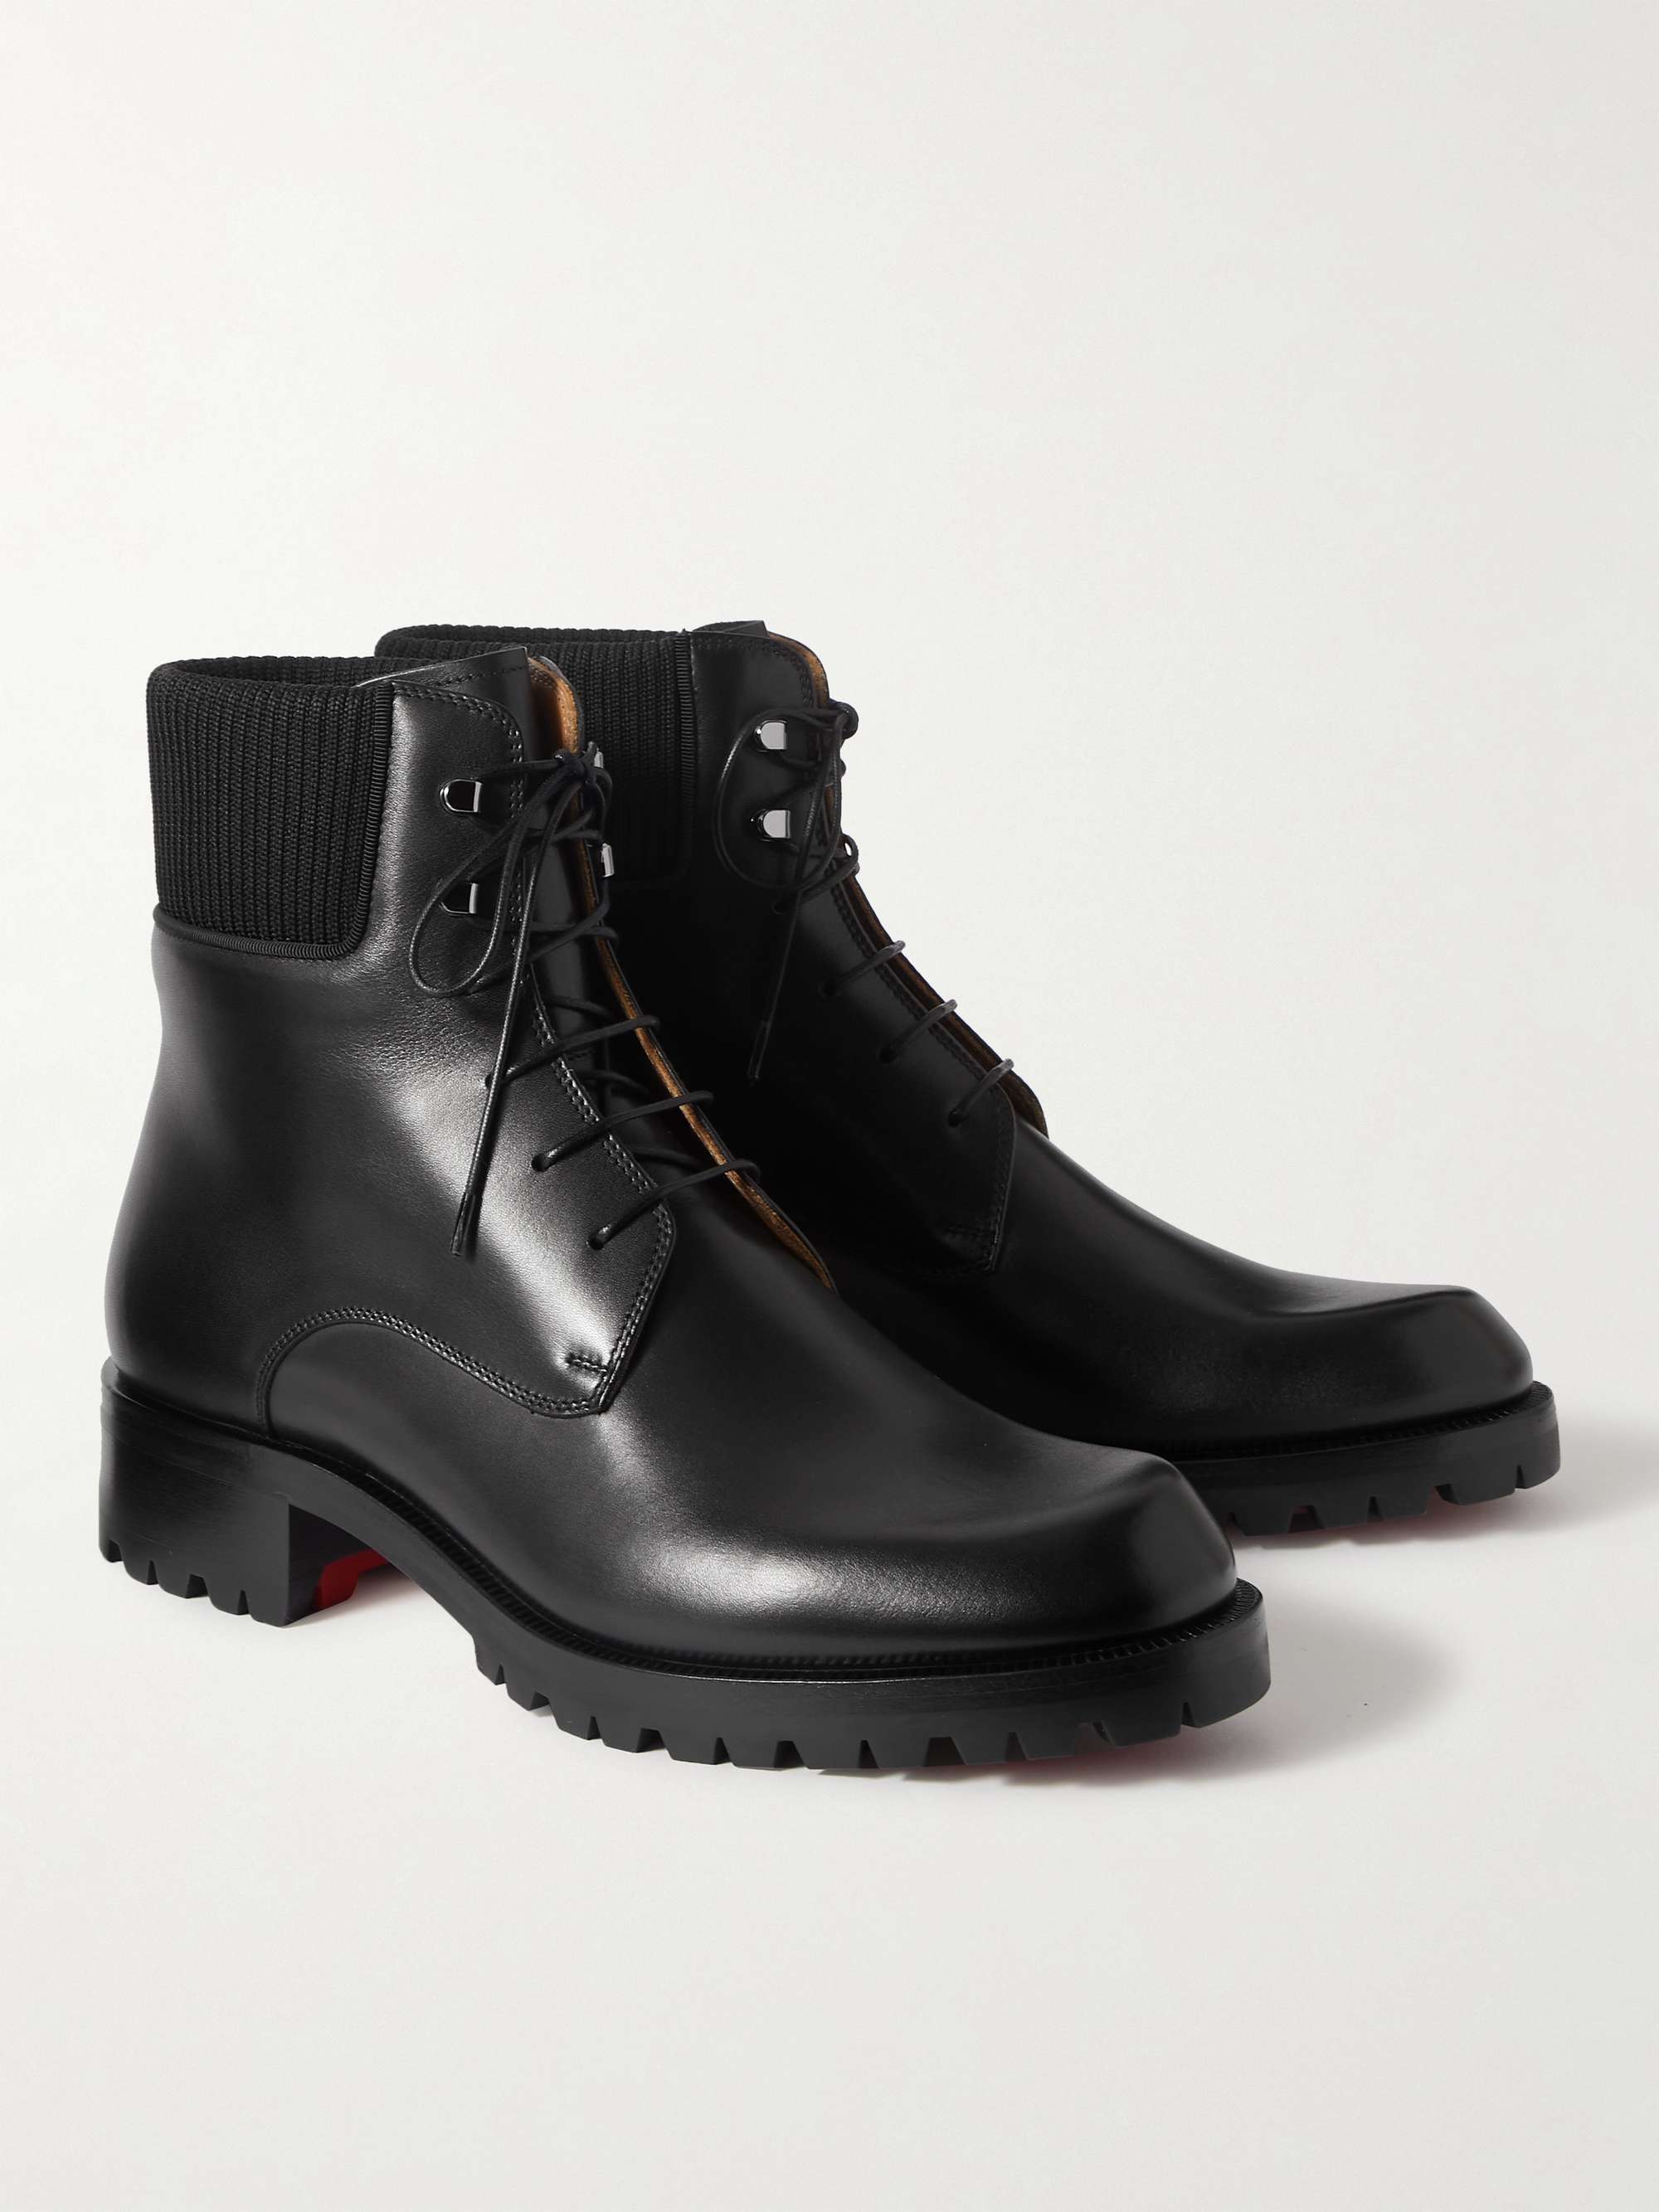 CHRISTIAN LOUBOUTIN Trapman Ribbed-Knit and Grosgrain-Trimmed Leather Boots